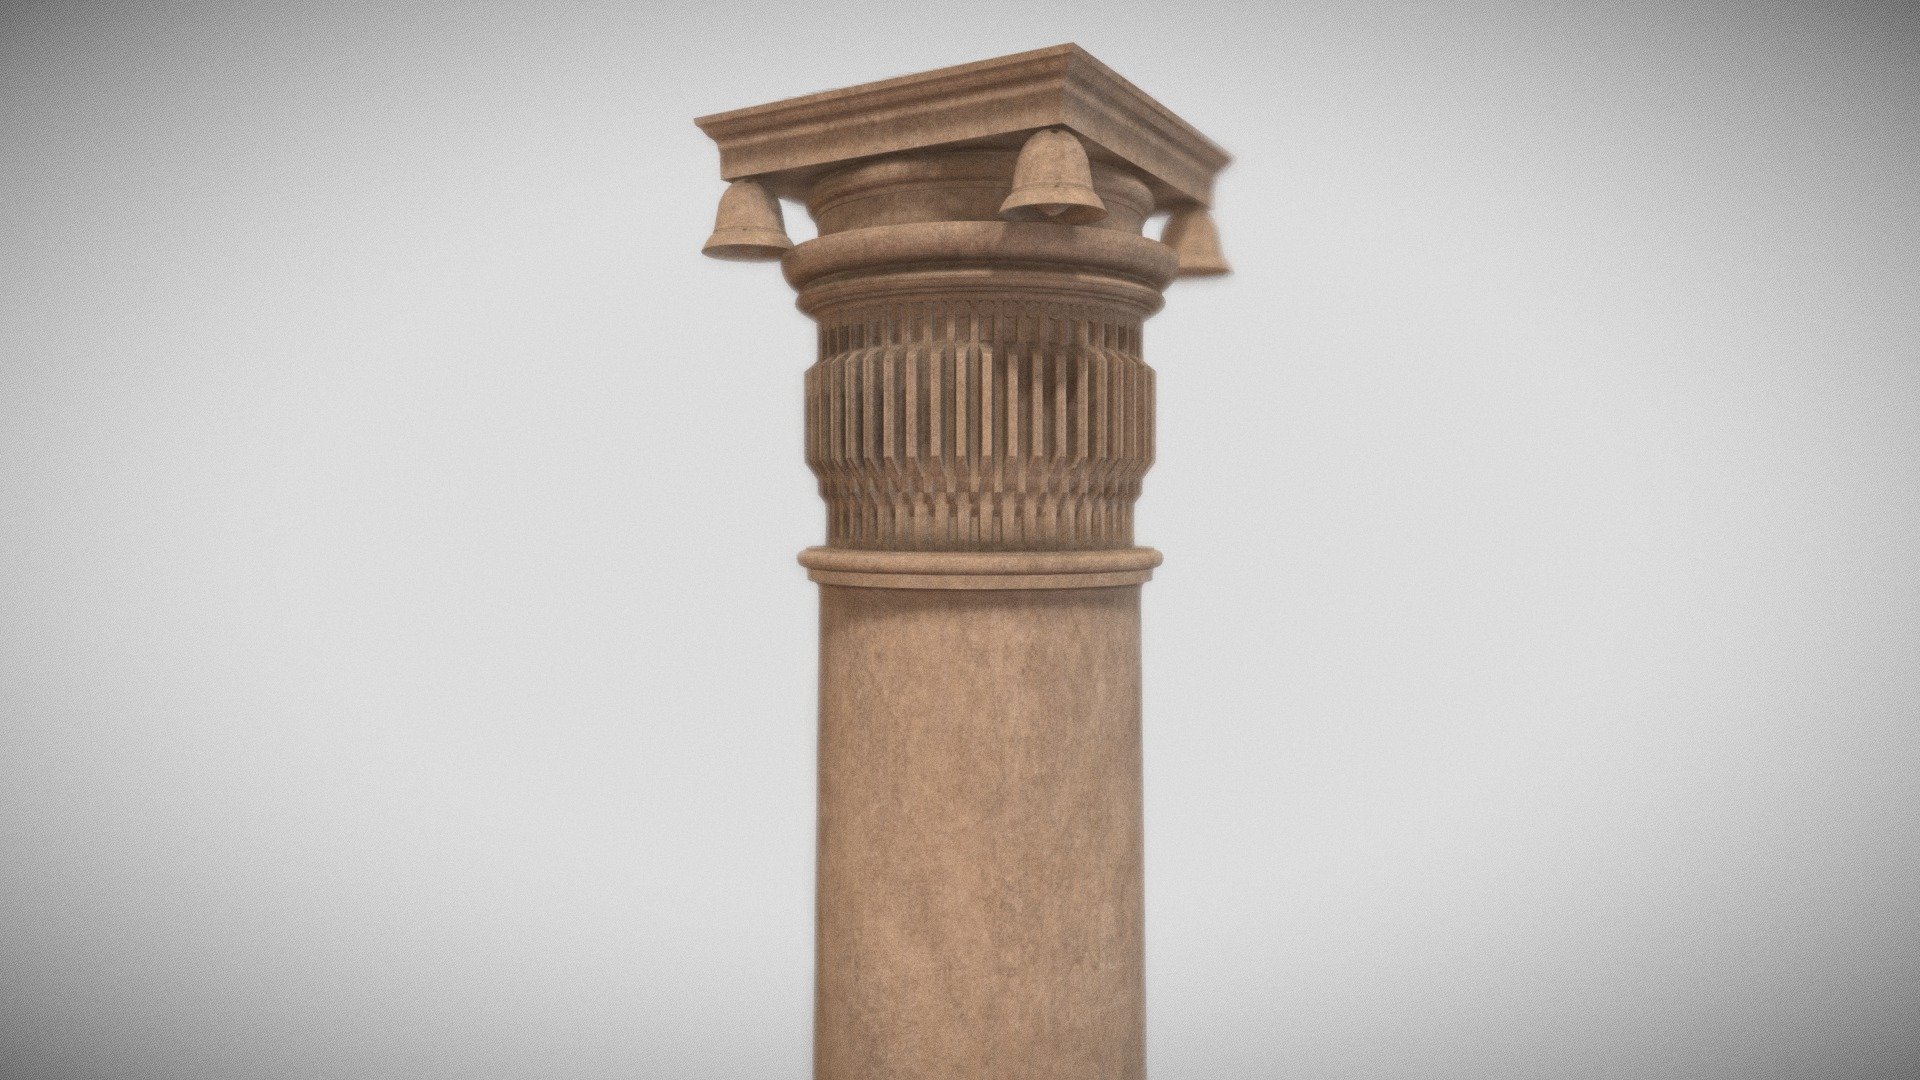 Indo-tuscan column designed by Edwin Lutyens for the Viceroy's House of New Delhi, today called Rashtrapati Bhavan (1912-1929). This design, in the vein of colonial architecture in New Delhi, combines elements from classicist grammar with other Hindu, Islamic and ancient Indian Buddhist elements 3d model